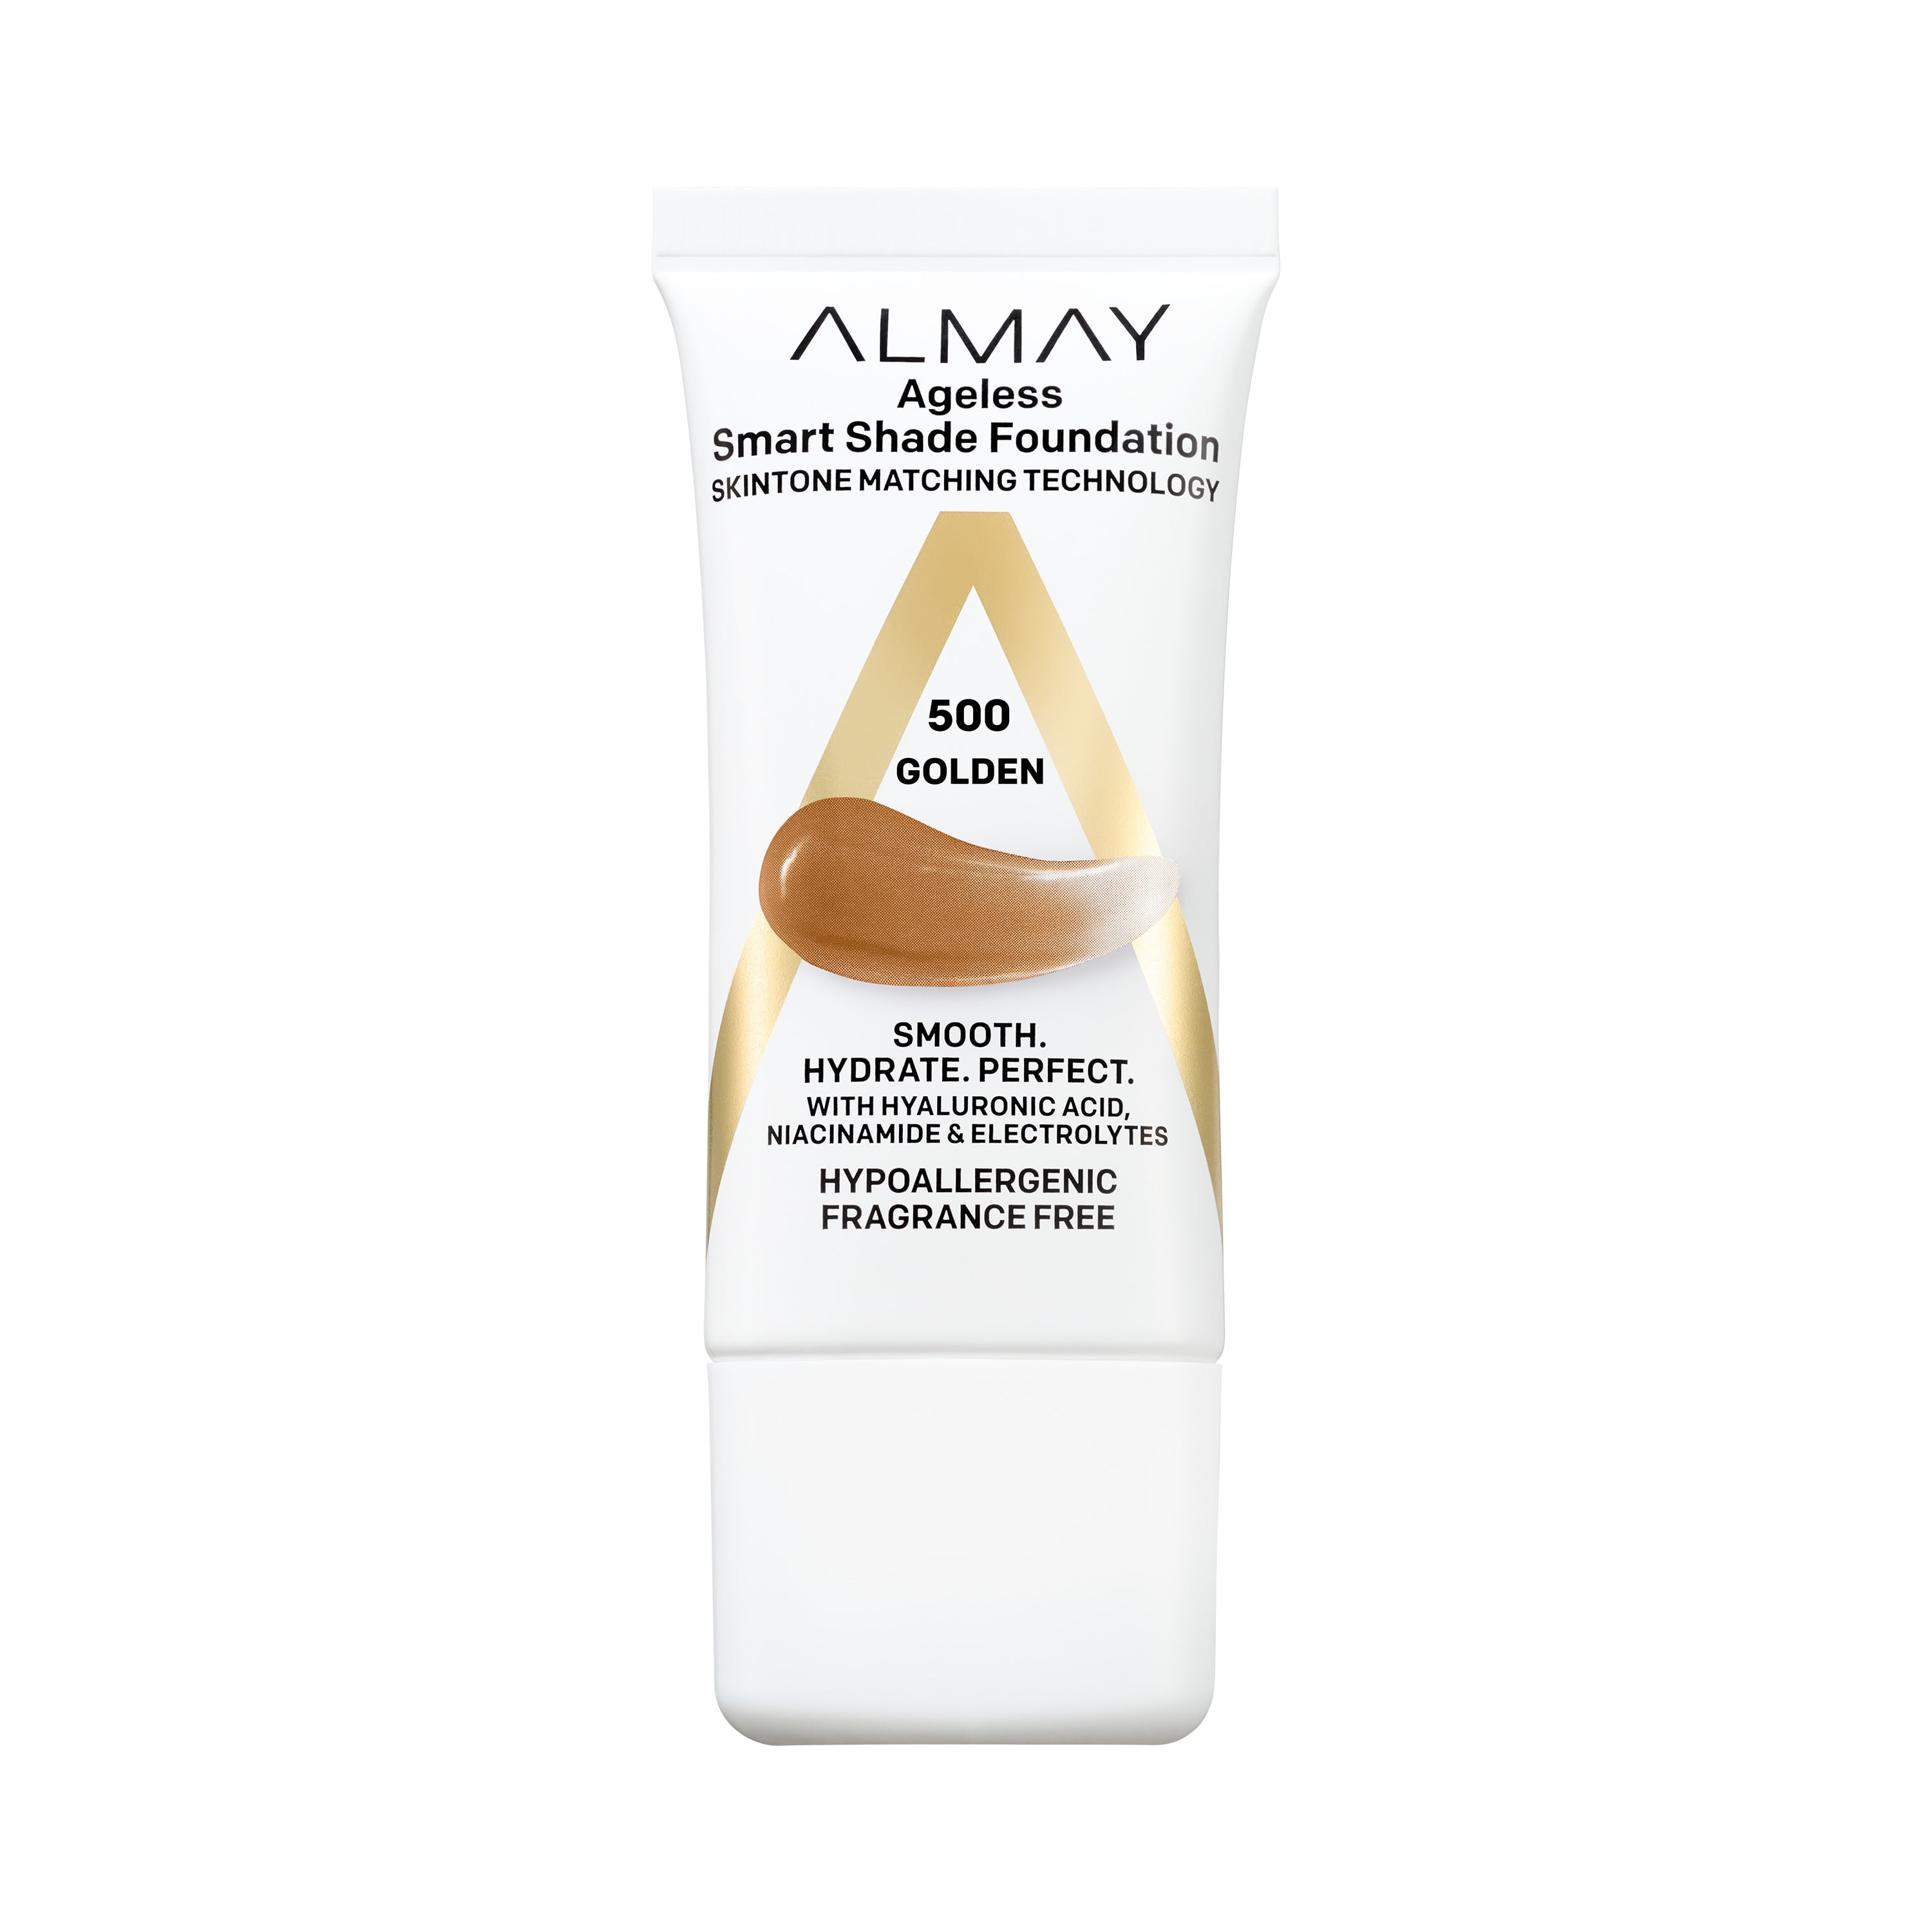 Almay Anti-Aging Foundation by Almay, Smart Shade Face Makeup with Hyaluronic Acid, Niacinamide, Vitamin C & E, Hypoallergenic, Fragrance Free, 500 Golden, 1 Fl Oz, 500 Golden, 1 fl oz.